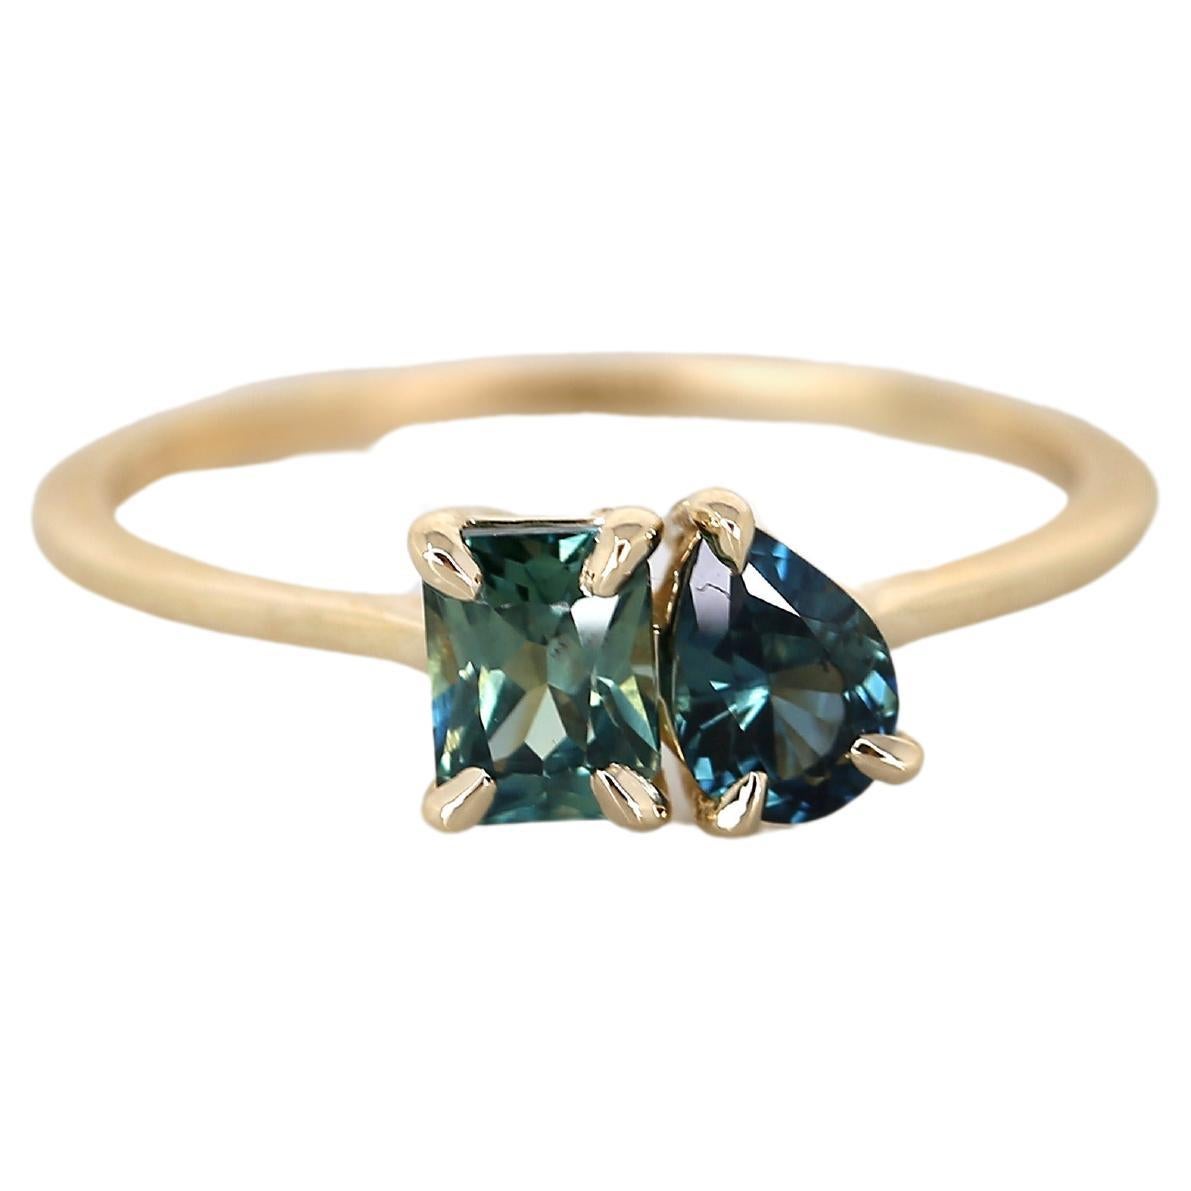 Introducing our dainty Toi et Moi ring, Gemini, a stunning one-of-a-kind piece adorned with various shades of natural teal sapphires, meticulously hand-mounted by our expert artisans. This timeless masterpiece is the epitome of elegance and